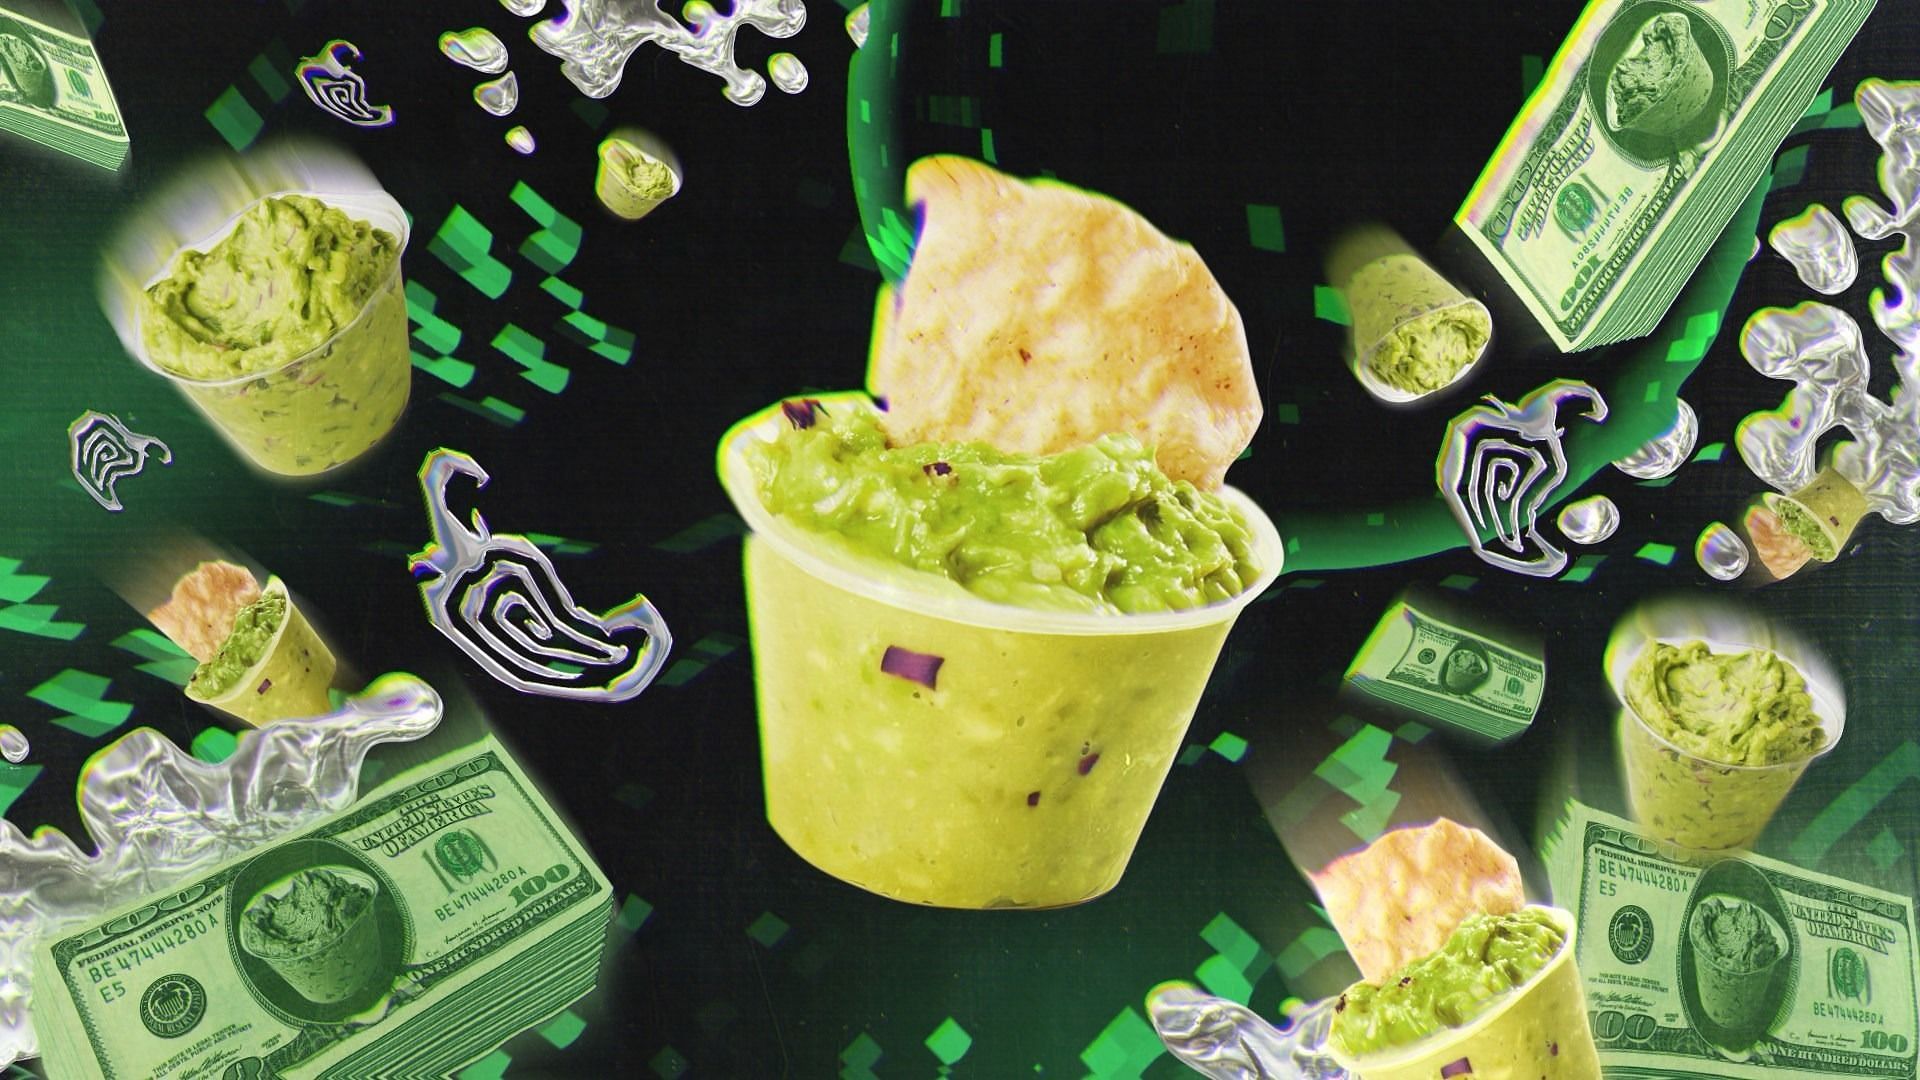 Chipotle relaunches ‘Guac Mode’ that allows customers to gain access to